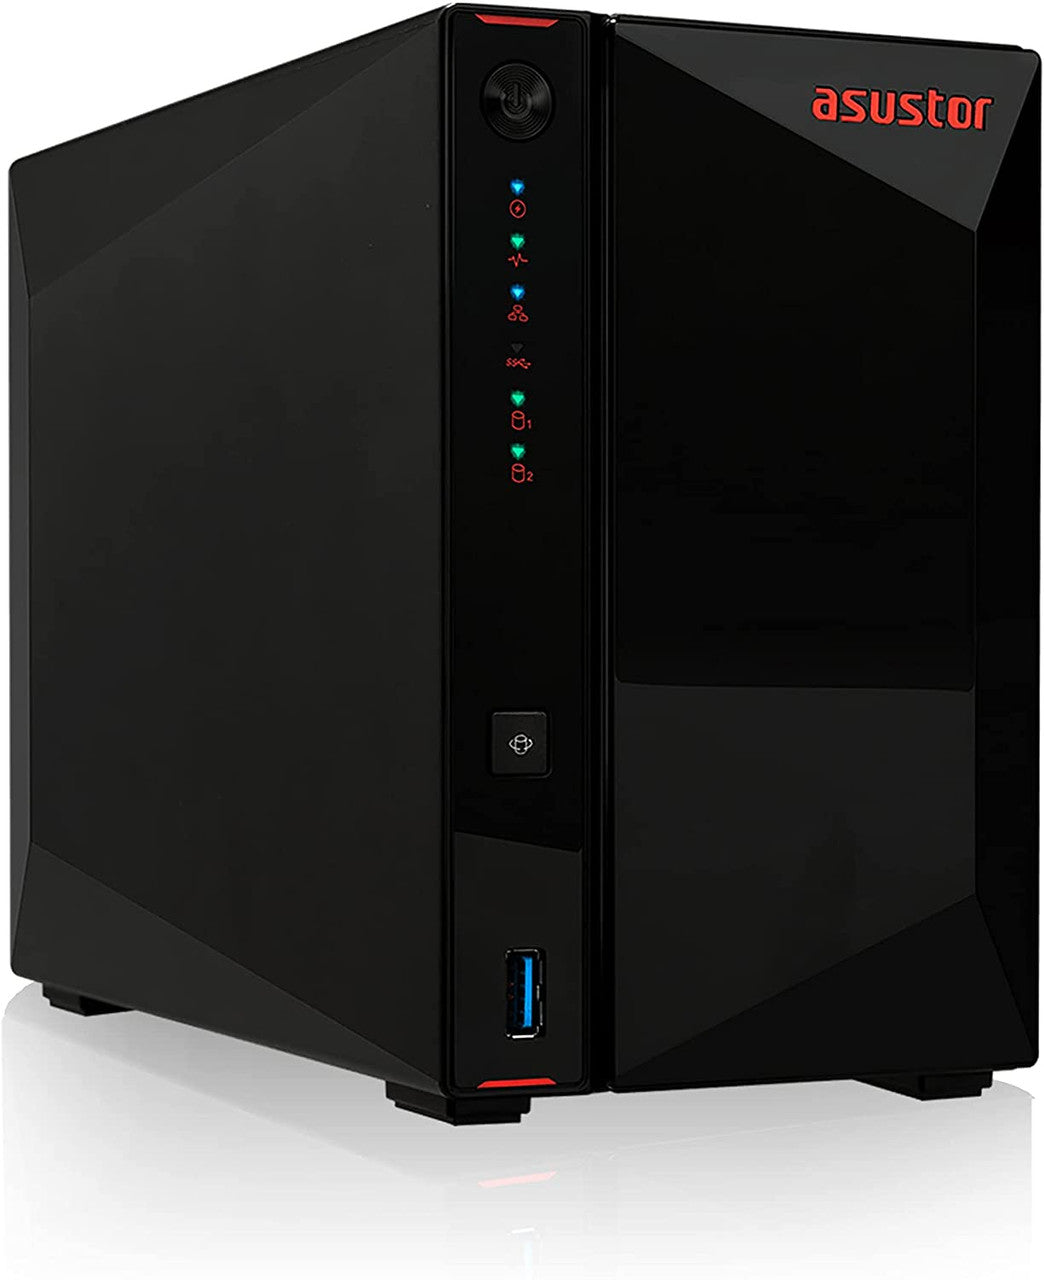 Asustor AS5202T 2-Bay Nimbustor 2 NAS with 8GB RAM and 20TB (2 x 10TB) Seagate Ironwolf NAS Drives Fully Assembled and Tested